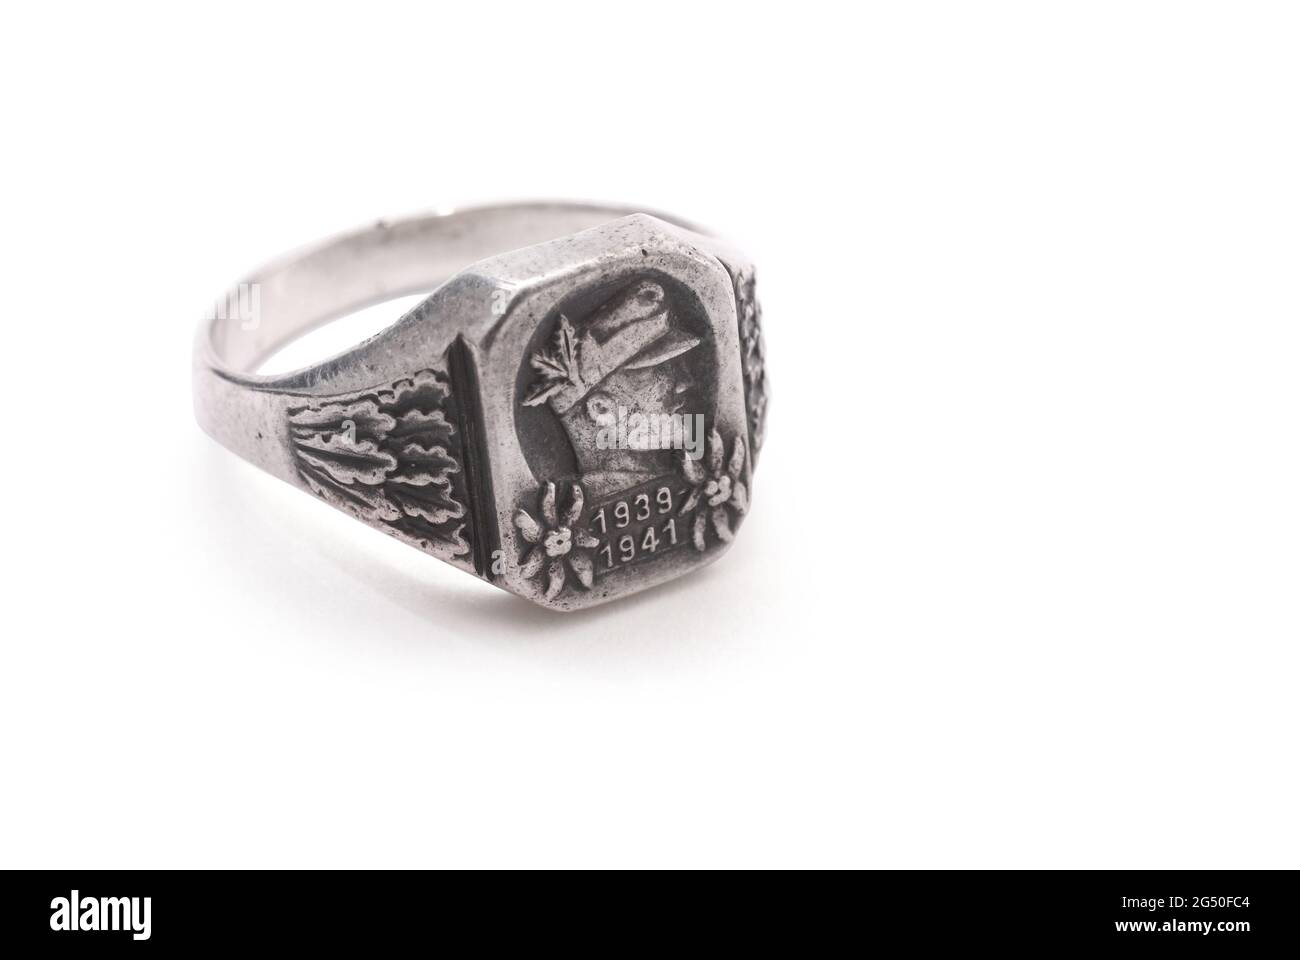 World War II period. The ring of German soldiers (Wehrmacht). For battles during WW2. Nazi Germany Stock Photo